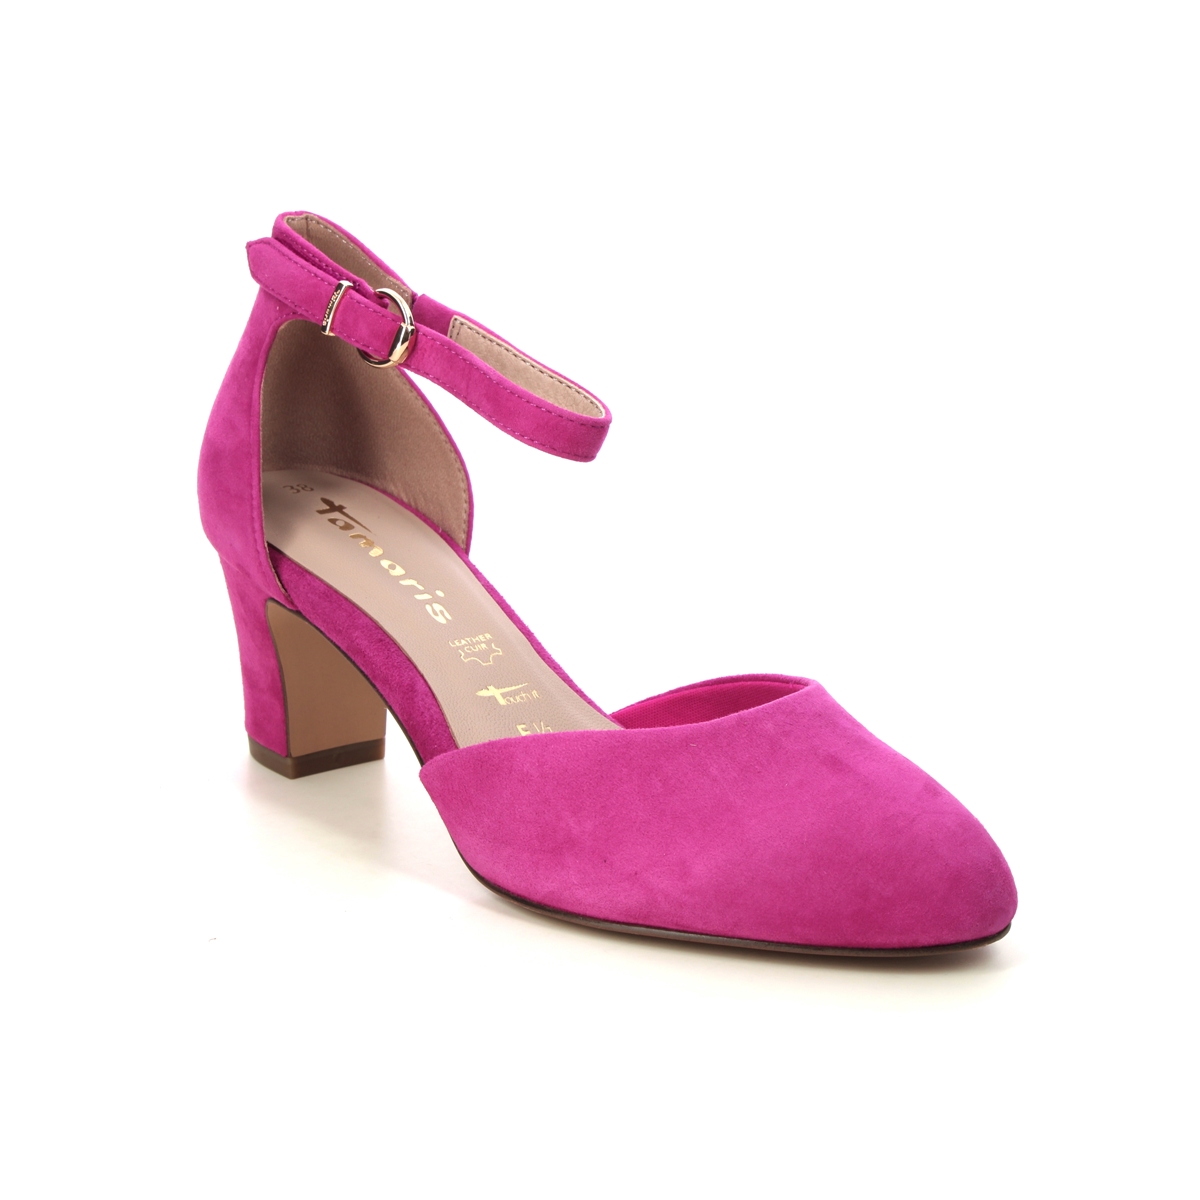 Tamaris Gala Daenerys Fuchsia Suede Womens Court Shoes 22401-42-513 in a Plain Leather in Size 36